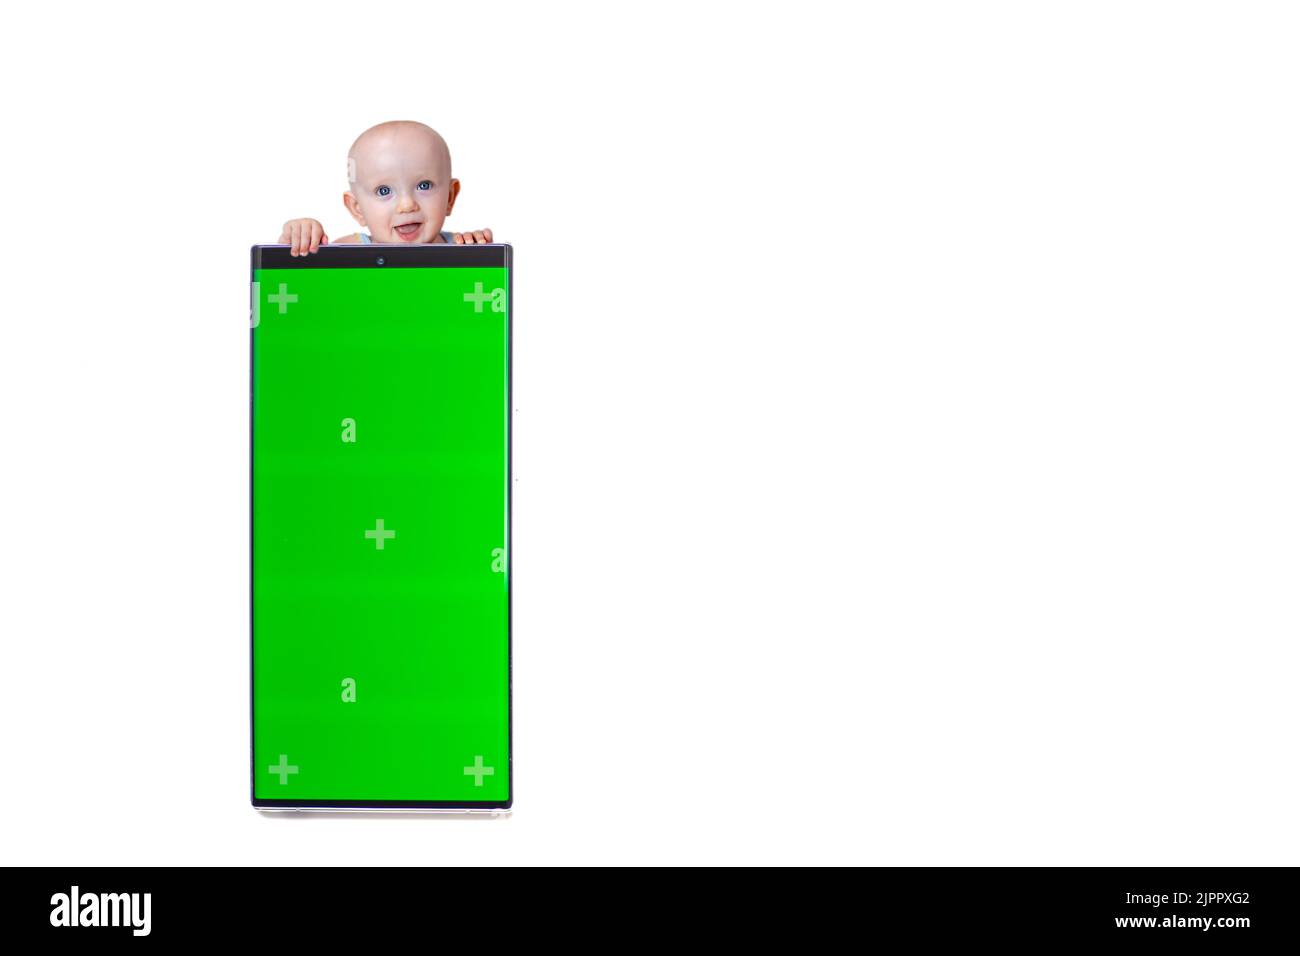 little cute baby peeking out from behind smartphone with green screen on white background isolate. Stock Photo